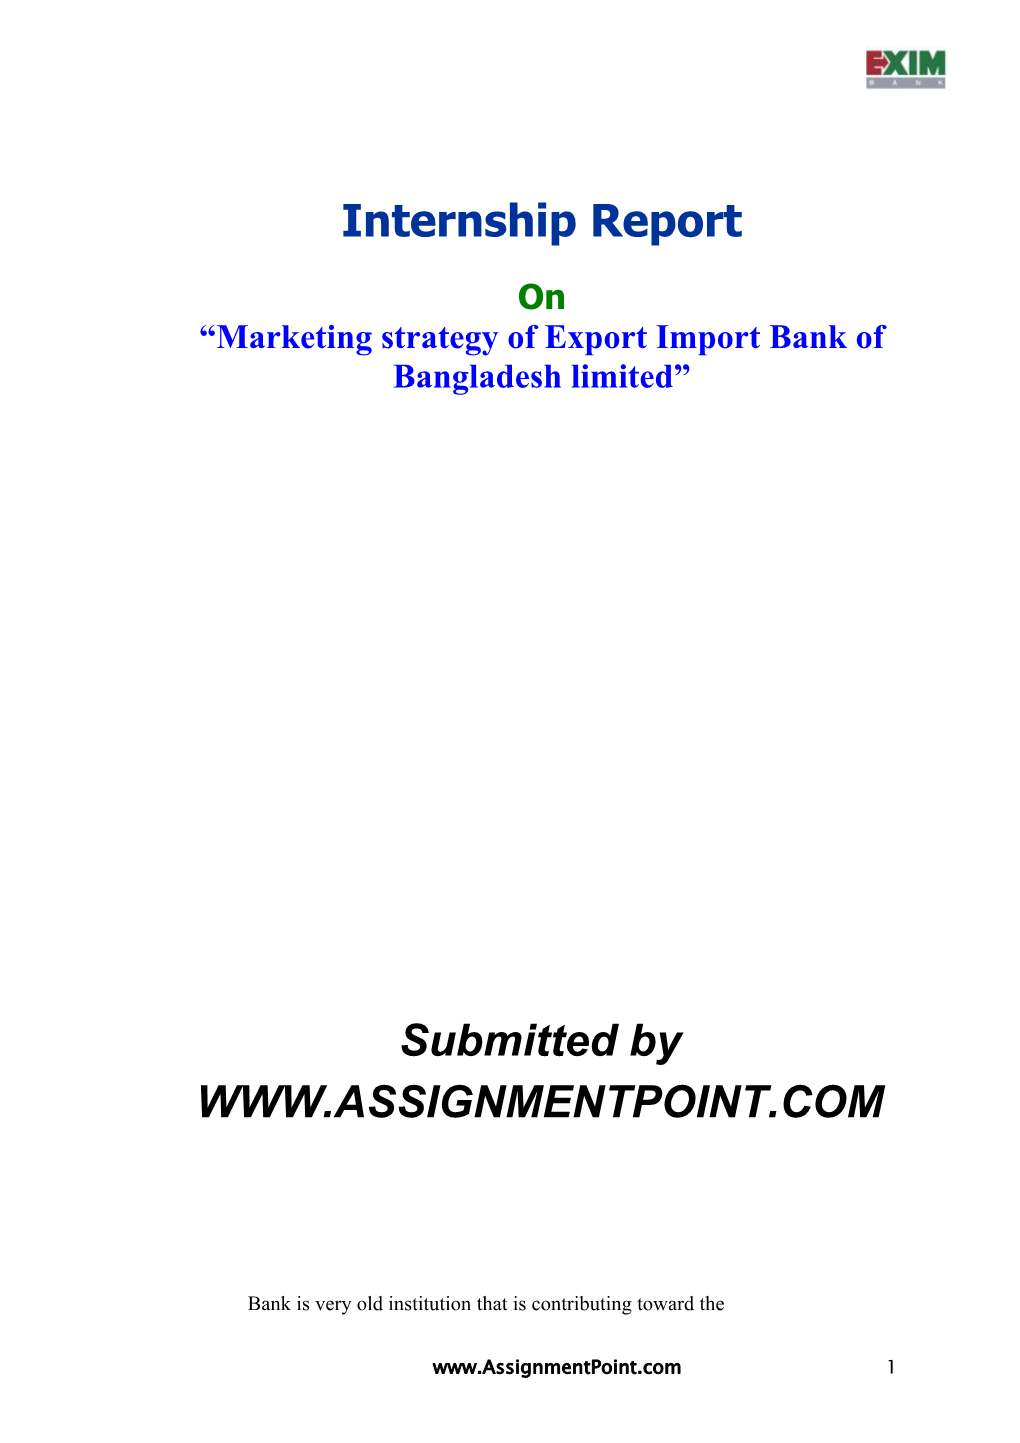 Marketing Strategy of Export Import Bank of Bangladesh Limited